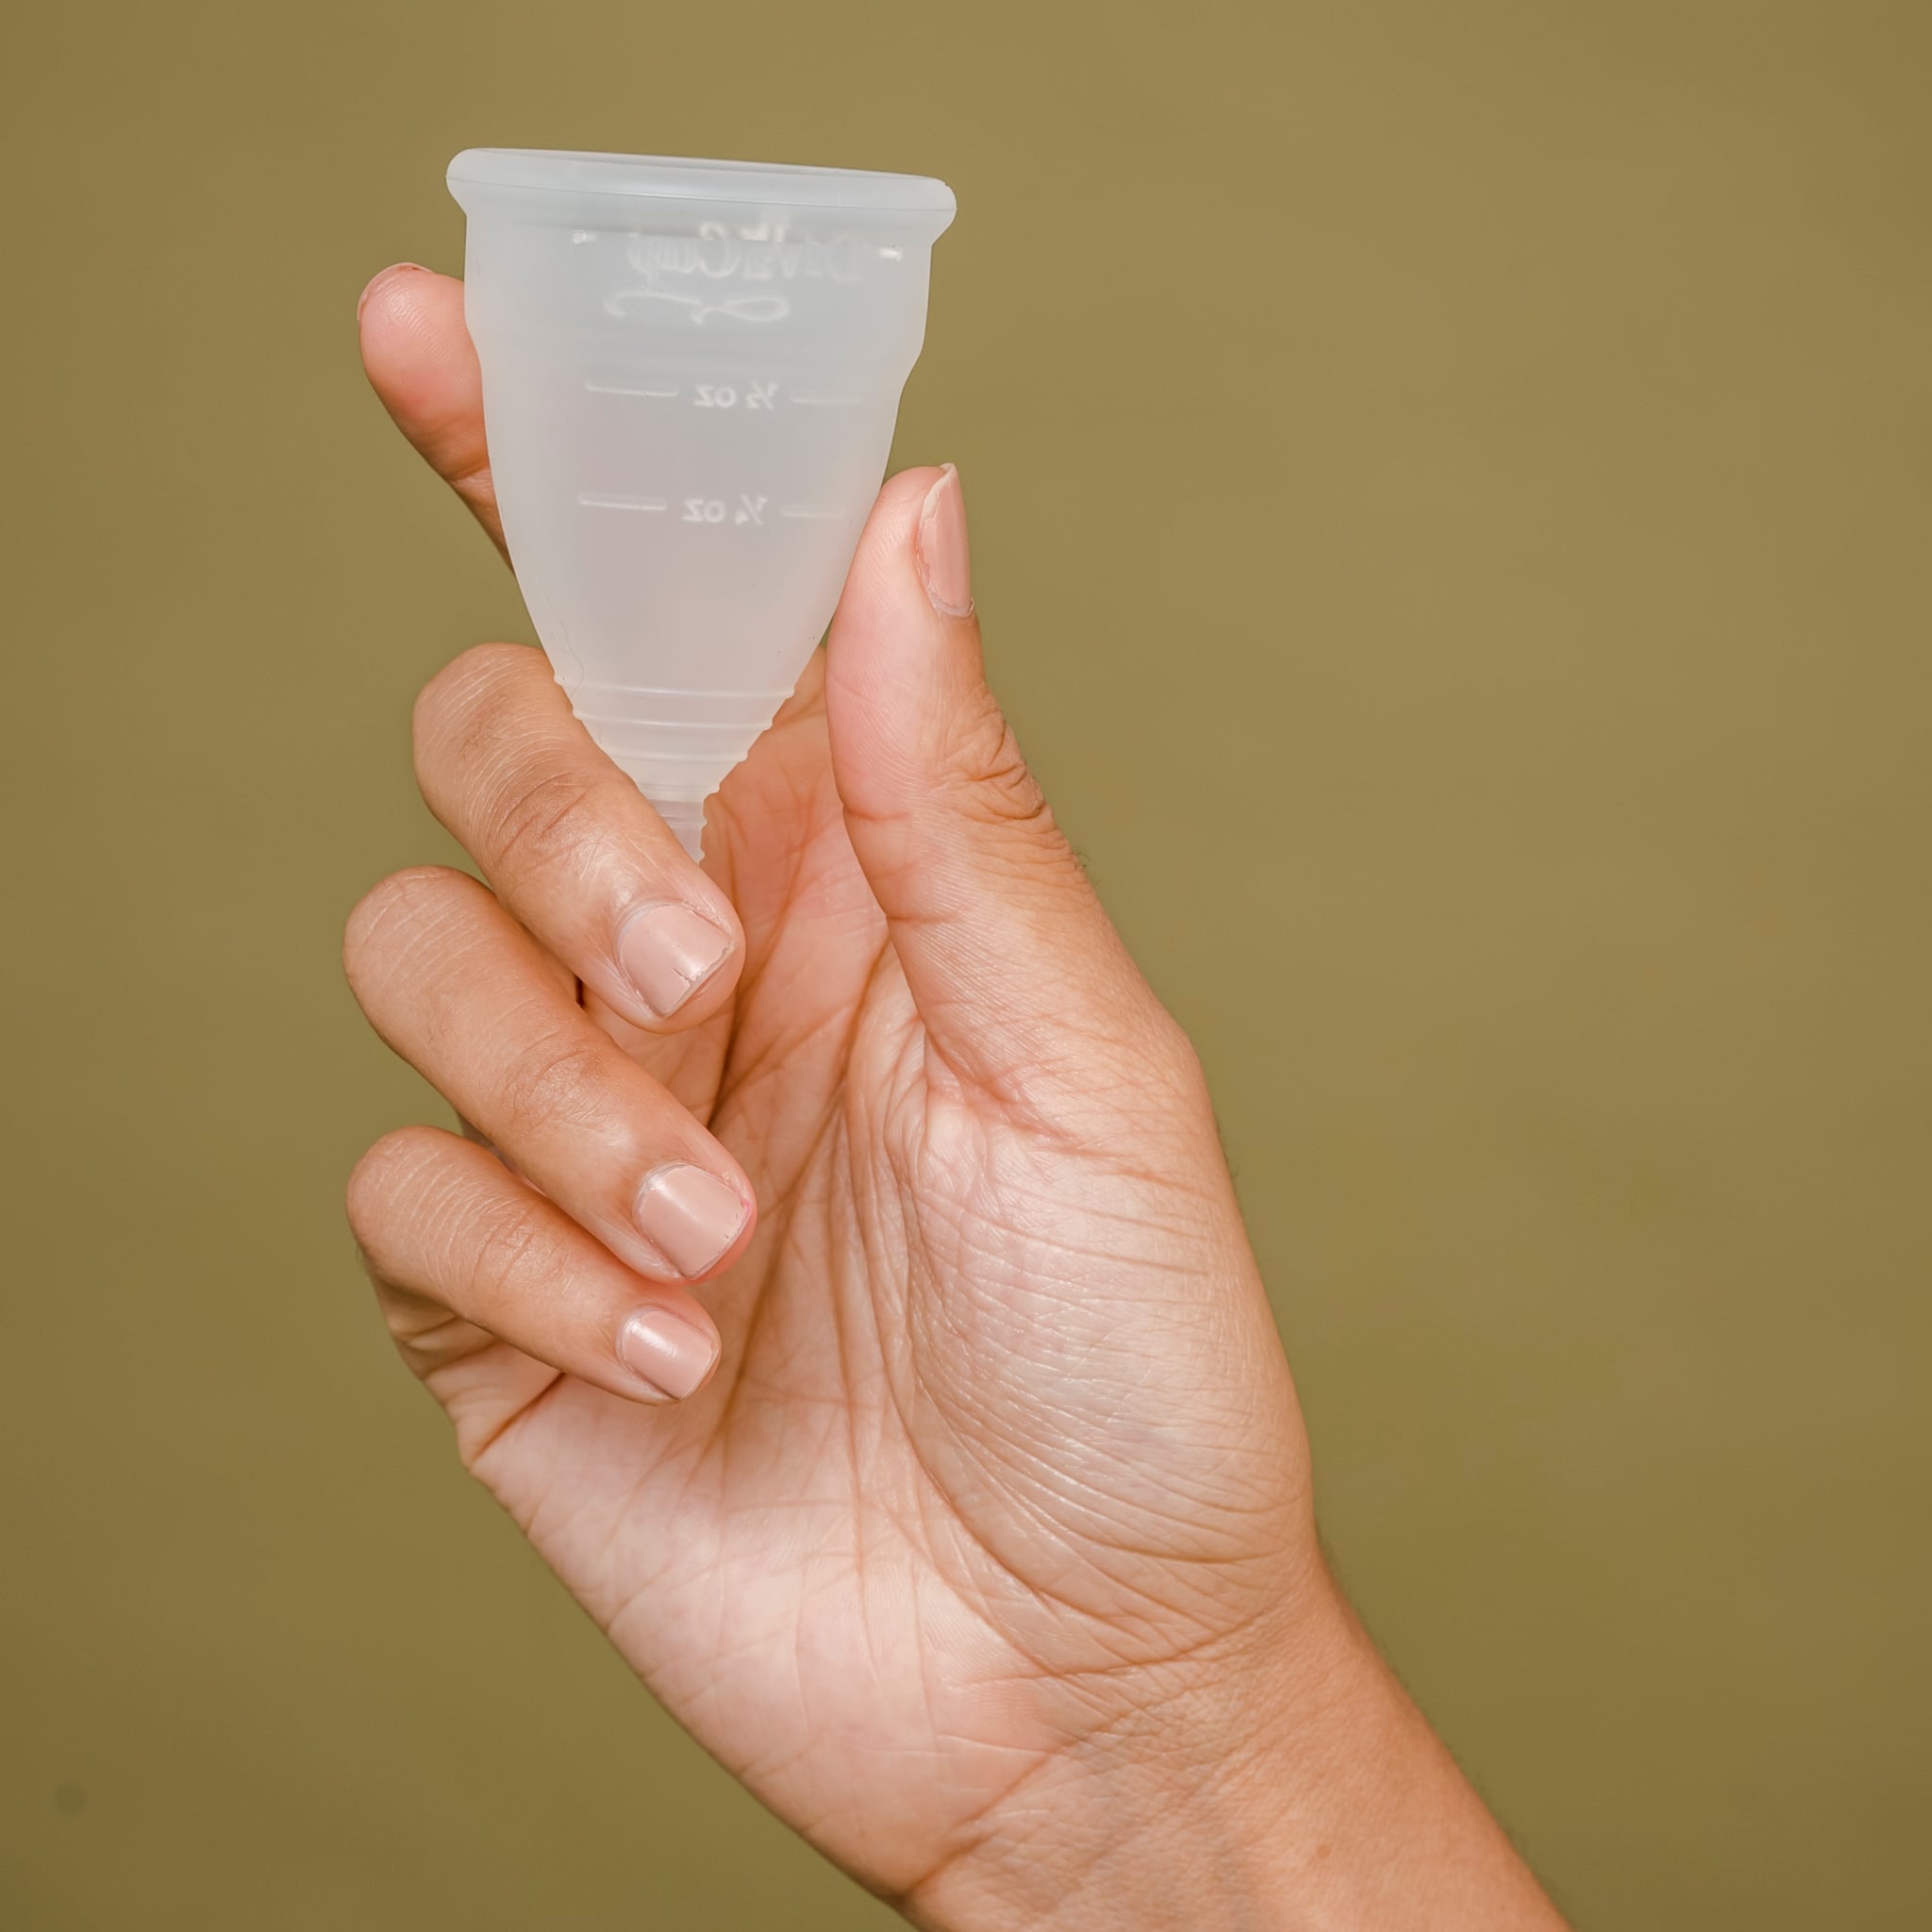 Menstrual Cup Cleansers to Help Menstrual Cup | POPSUGAR Fitness